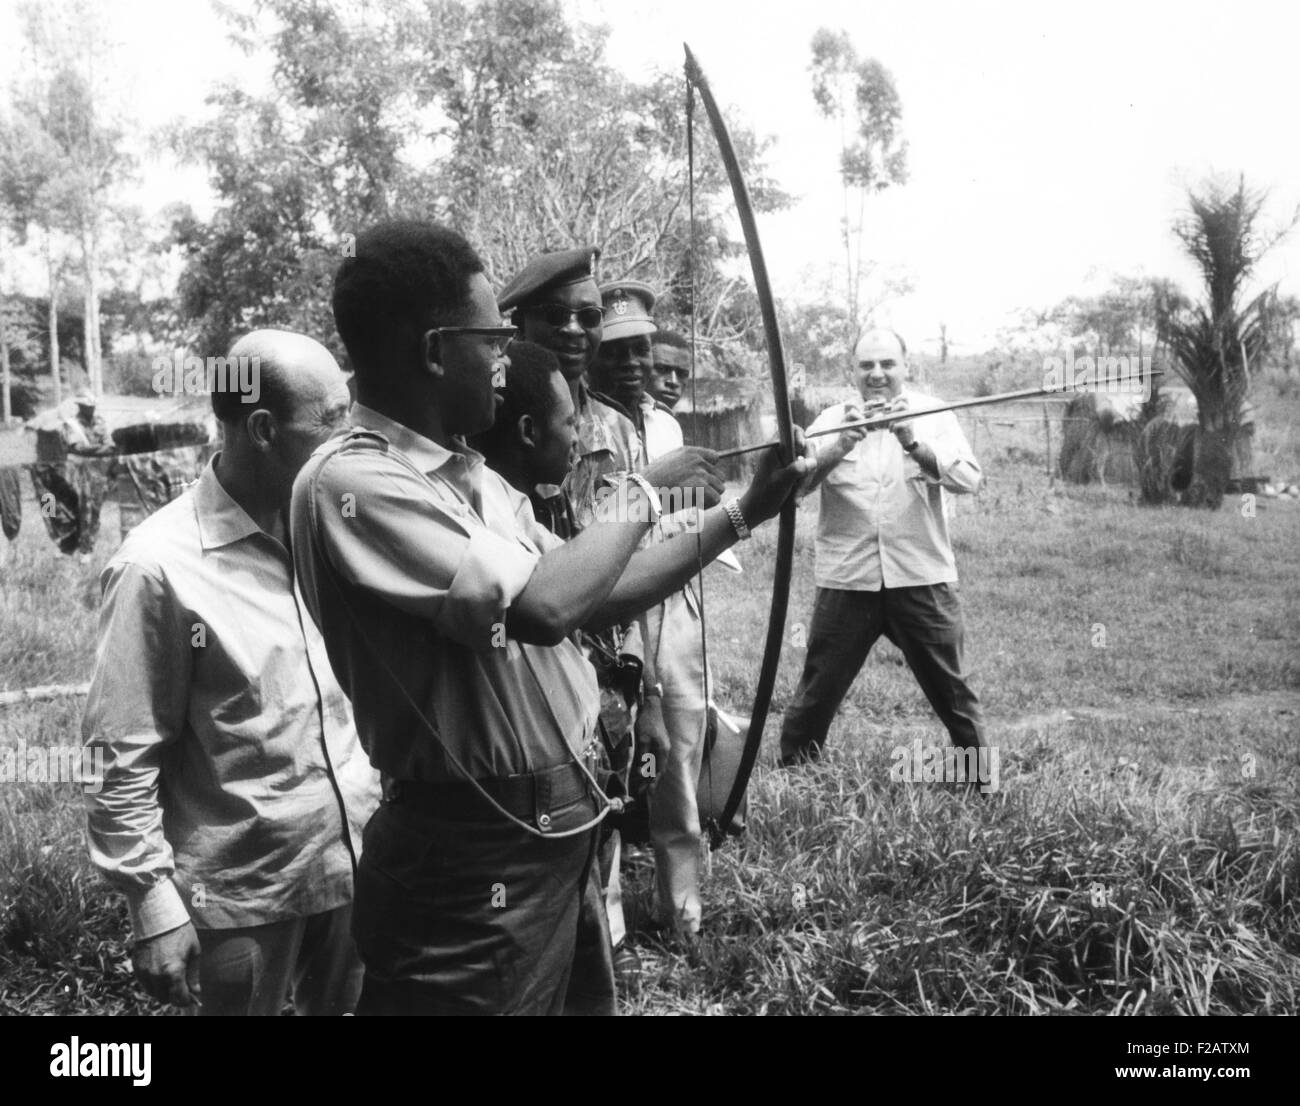 Gen. Joseph Mobutu, Chief of the Congolese Army, demonstrates his skill with bow and arrow. March 23, 1964. In 1960 Belgian forces aided his coup d’état that deposed and killed Patrice Lumumba. Colonel Mobutu, used his position as Army Chief of Staff to dominate President Kasa-Vubu who led a weak civilian government. (CSU 2015 11 1557) Stock Photo